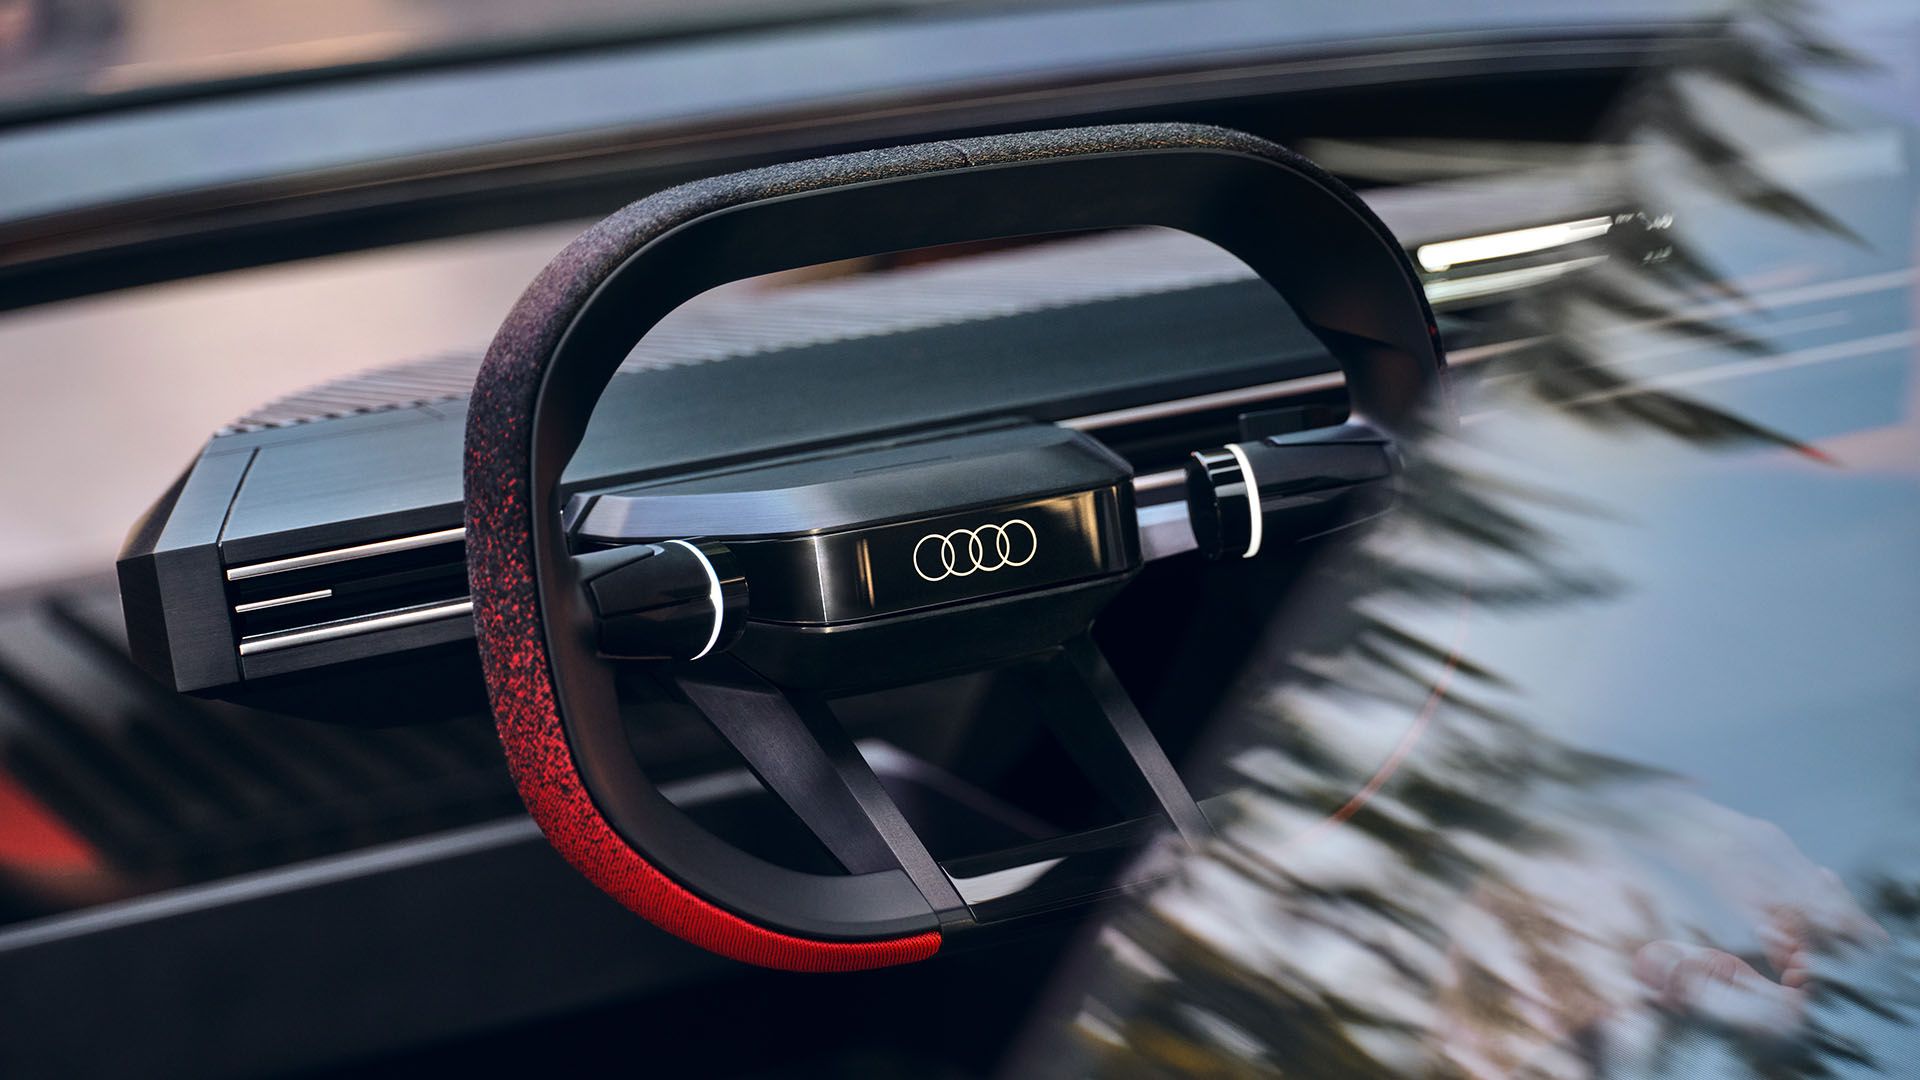 A look inside the cockpit of the Audi activesphere concept.